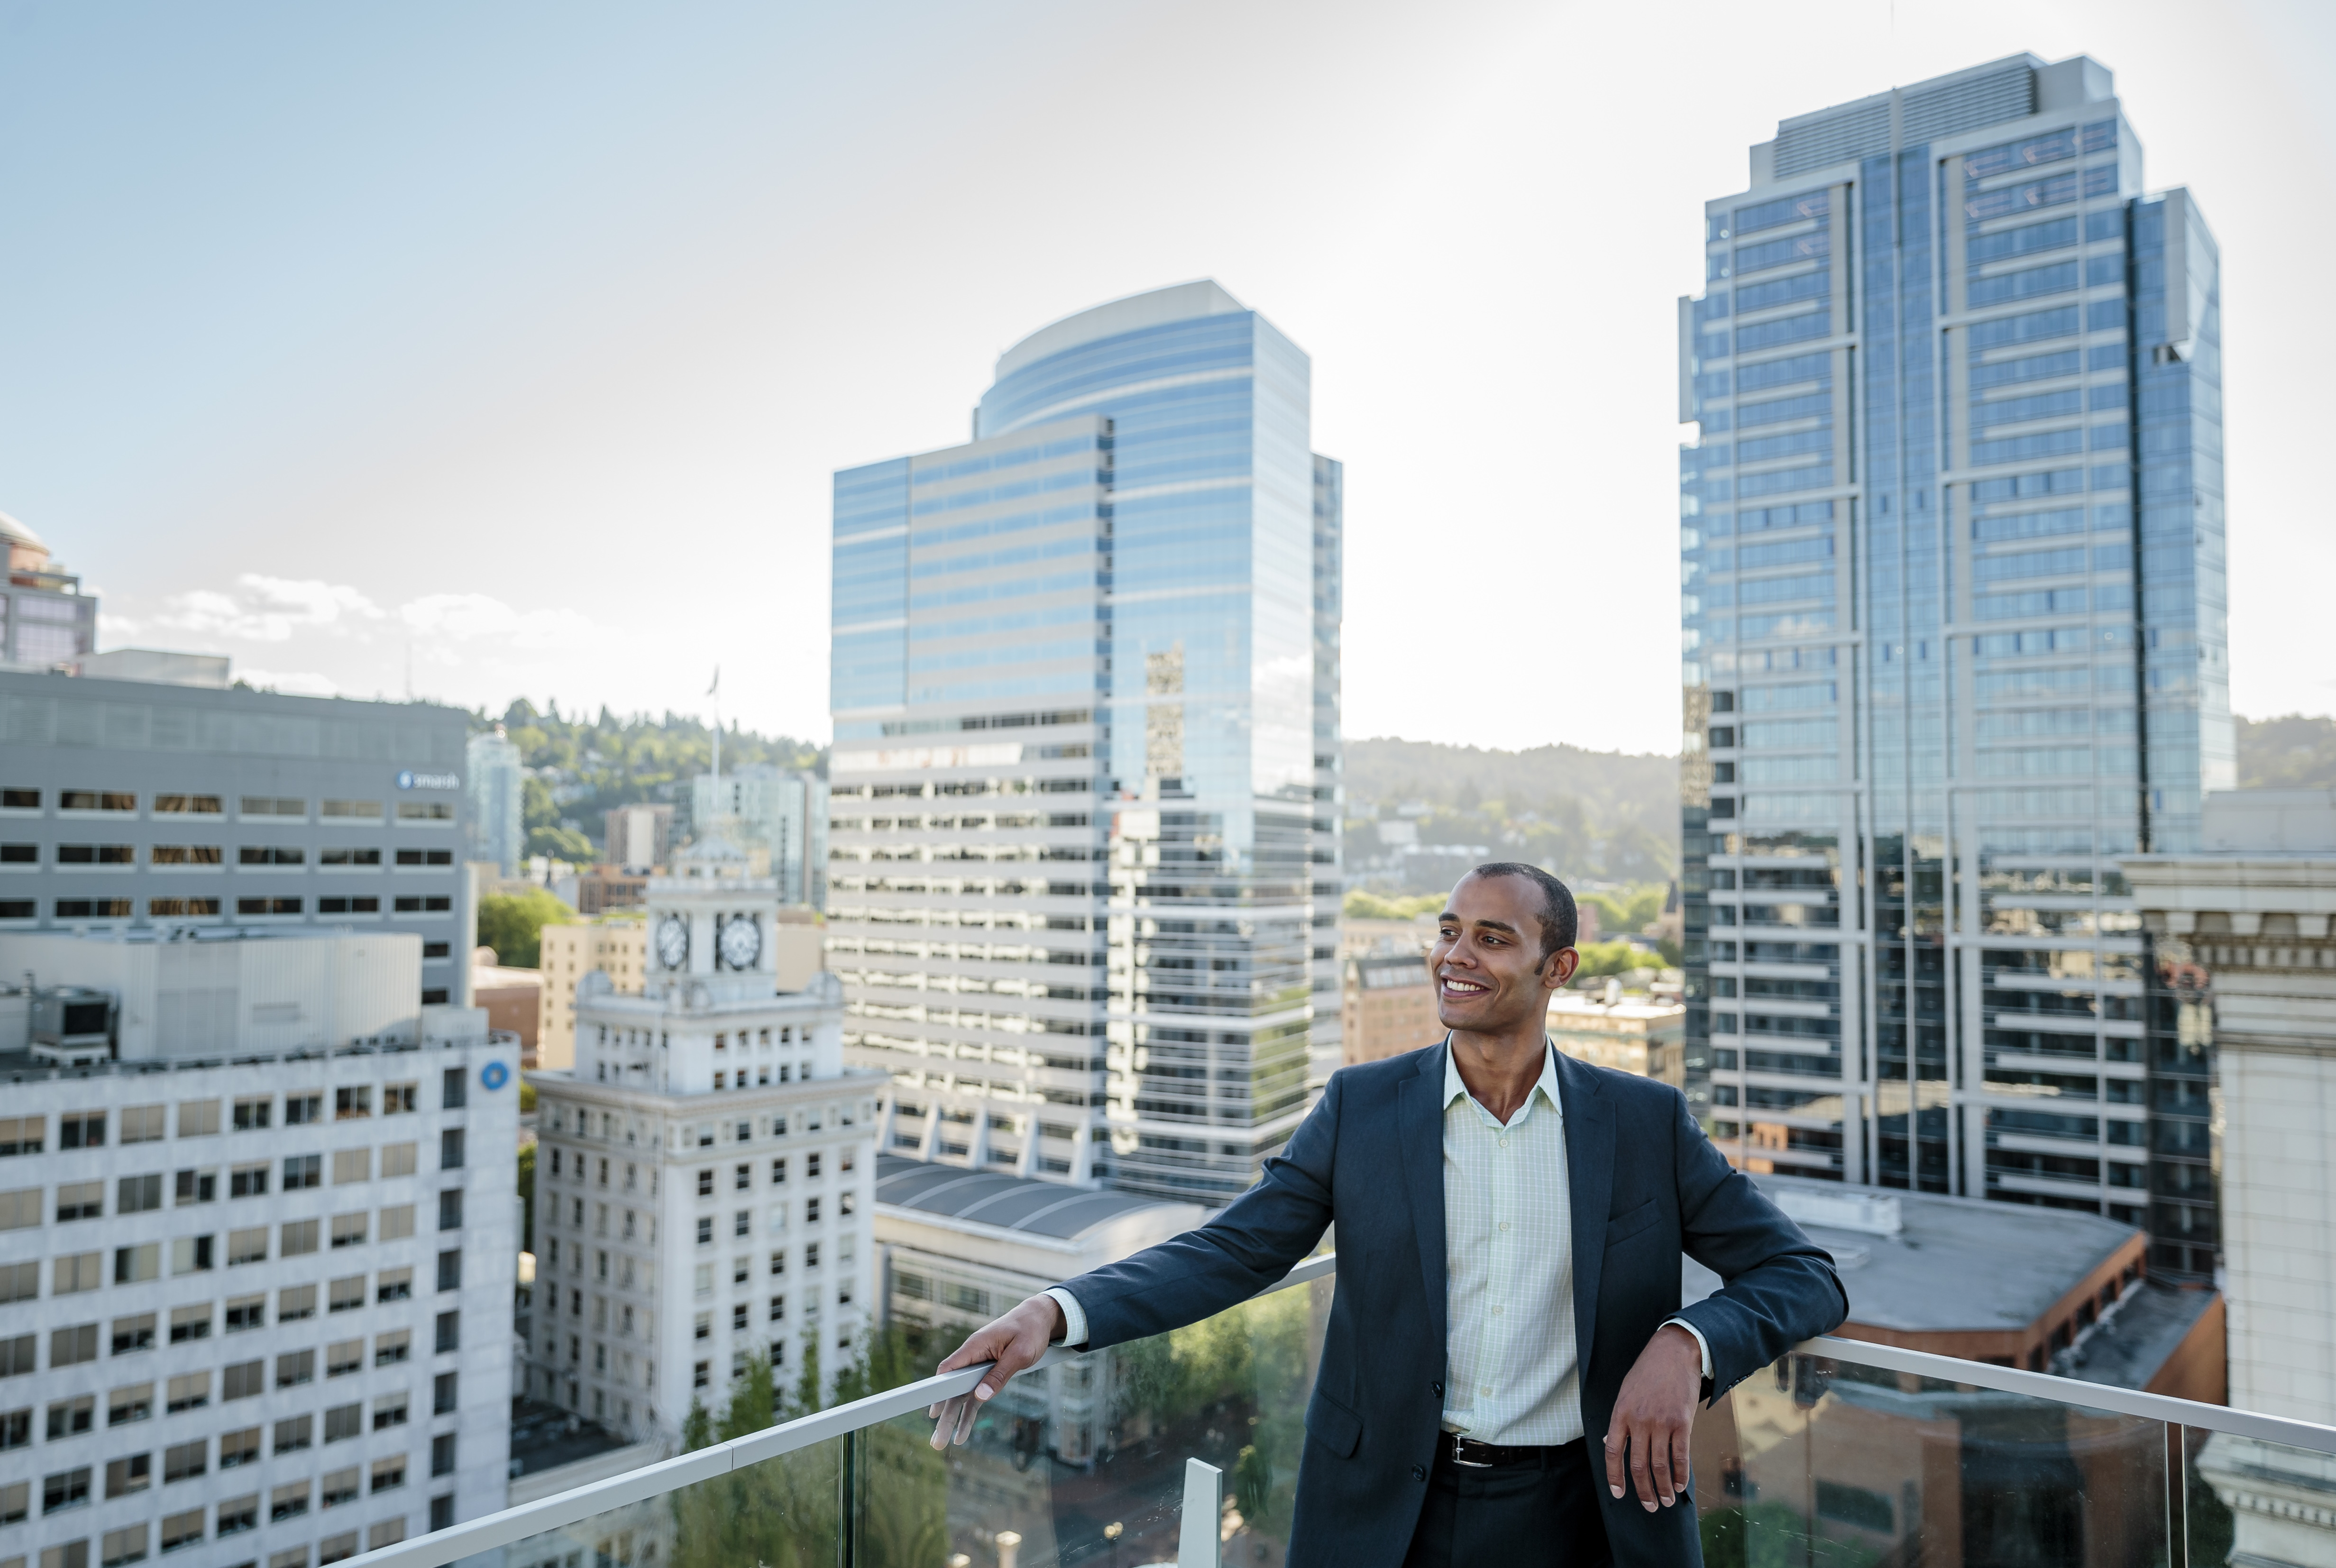 man in a suit standing on an outdoor patio with the Portland skyline in the background